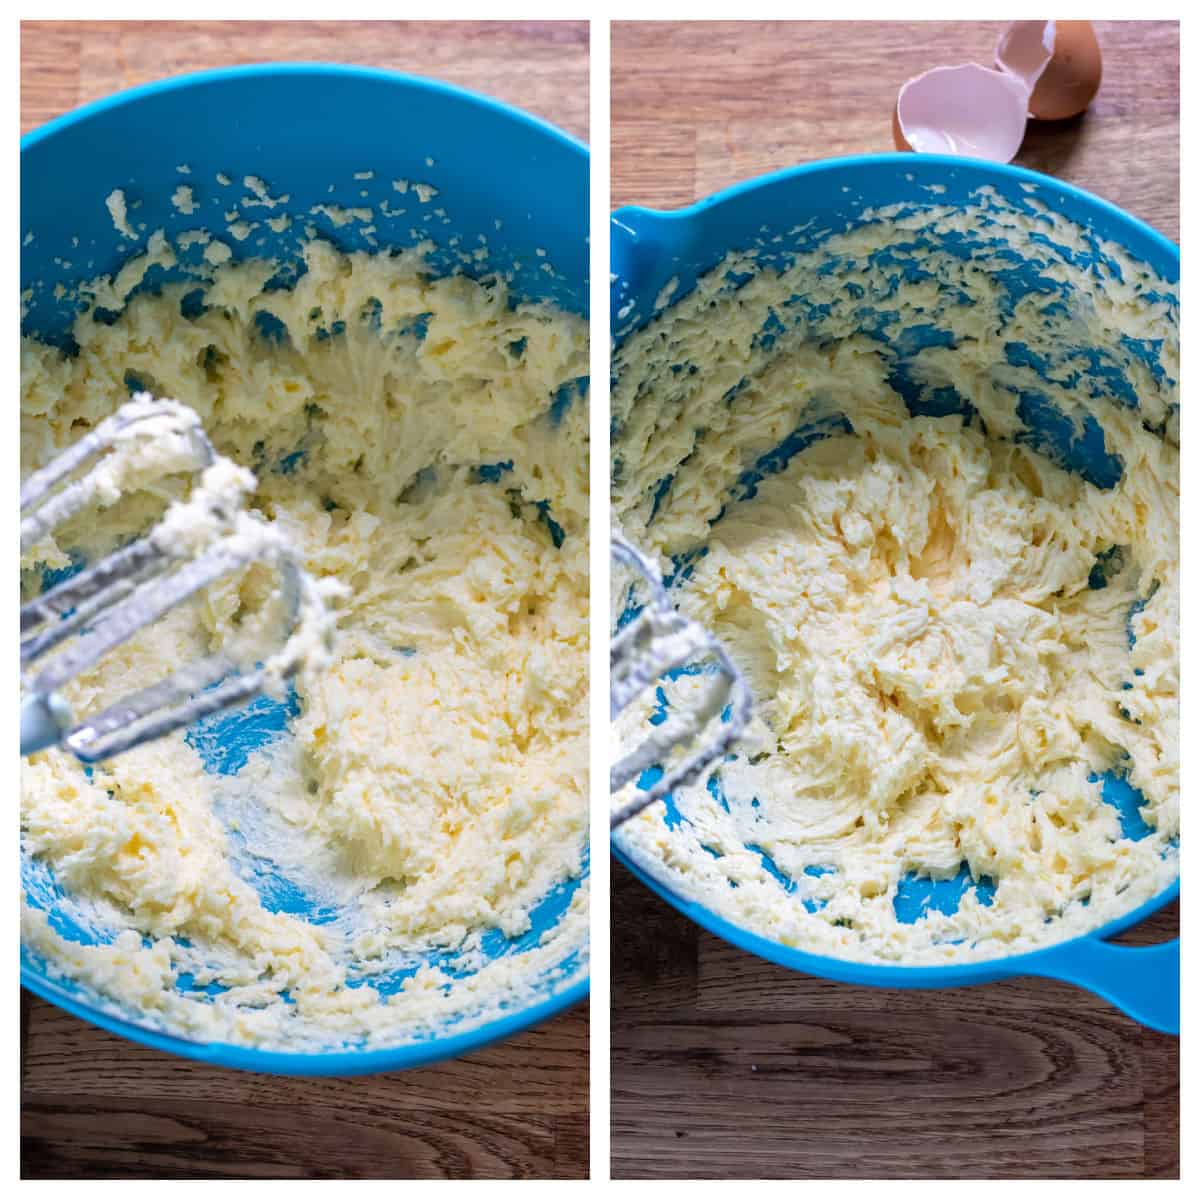 Creaming the butter.